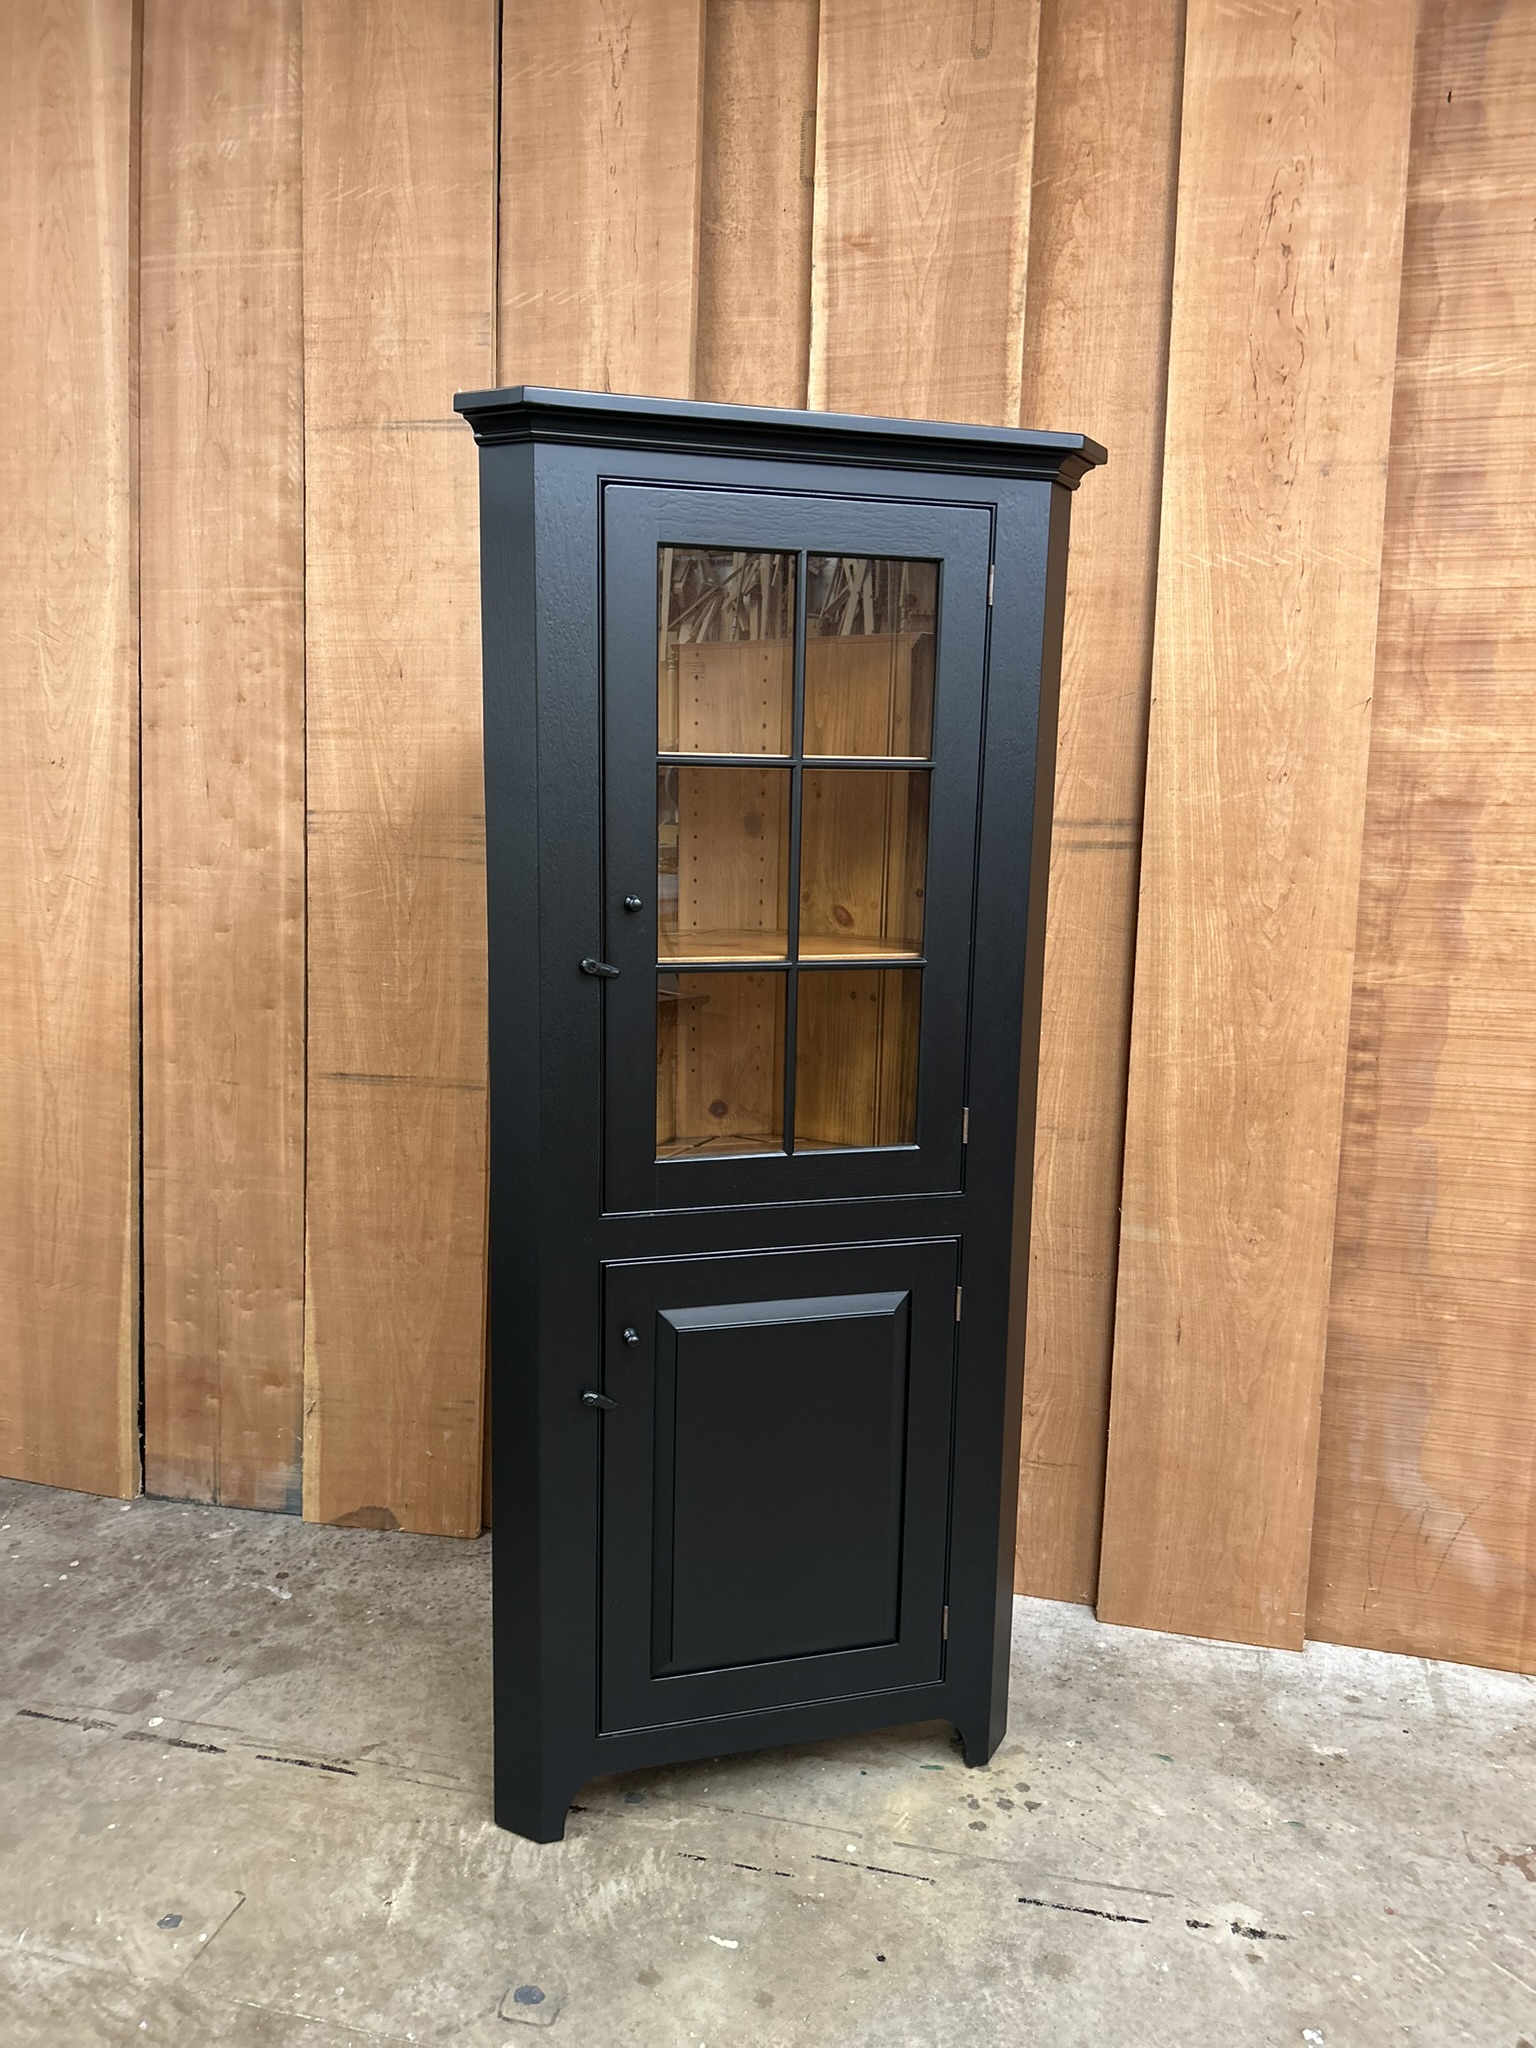 https://www.shakershoppe.com/wp-content/uploads/2023/11/Shaker-Corner-Cabinet-with-a-glass-door-by-Shaker-Shoppe-of-Lititz-PA-www.shakershoppe.com_.jpeg